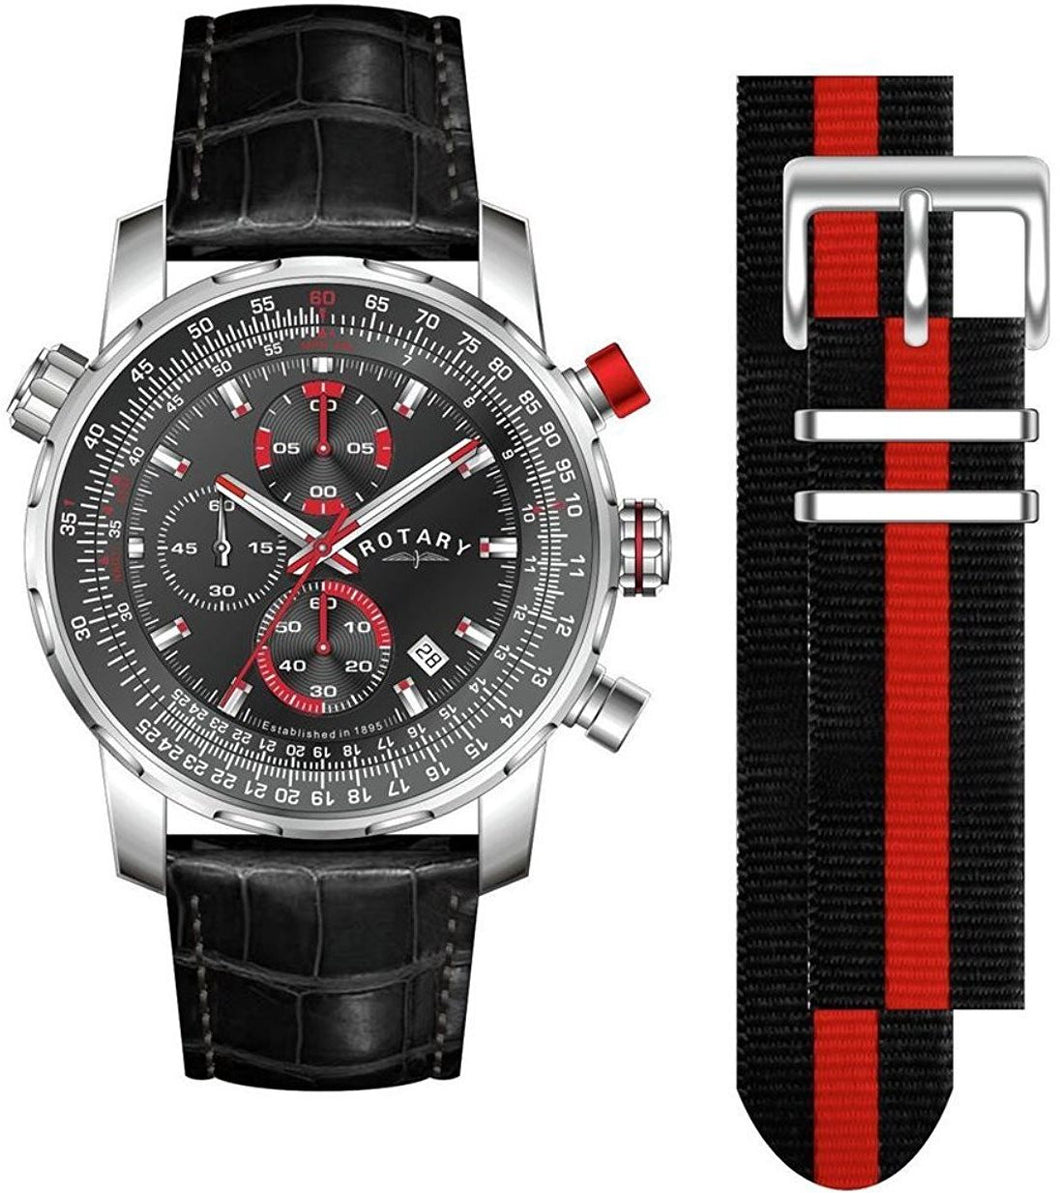 Authentic ROTARY Interchangeable Strap Chronograph Mens Watch